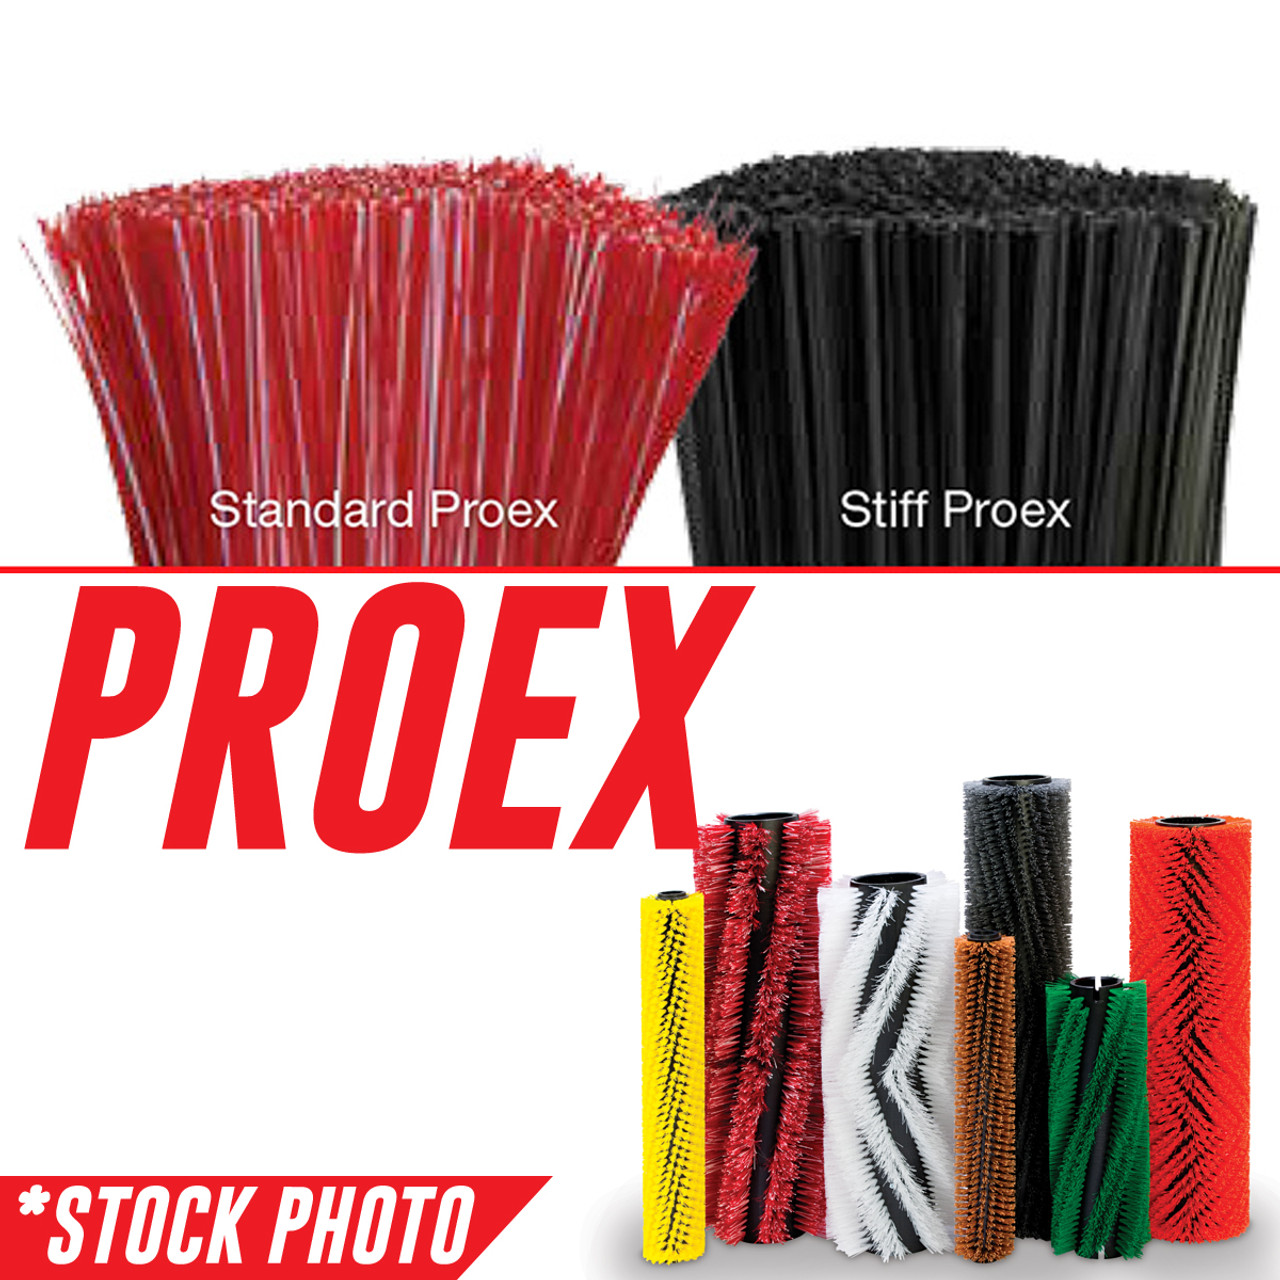 3315723: 56" Cylindrical Brush 8 Double Row Proex fits PowerBoss Models SW/10X